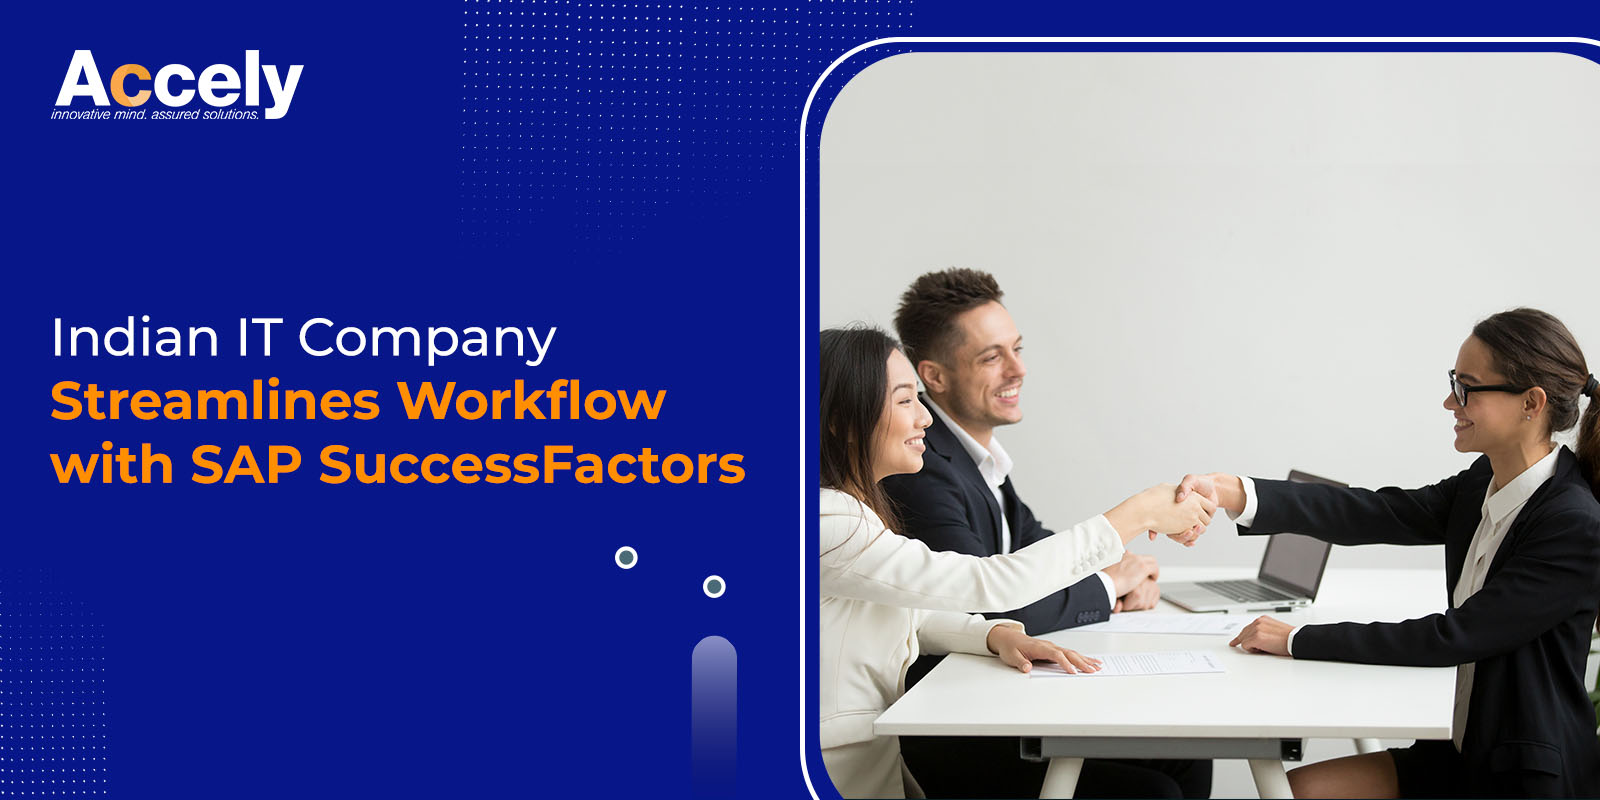 Indian IT Company Streamlines Workflow with SAP SuccessFactors